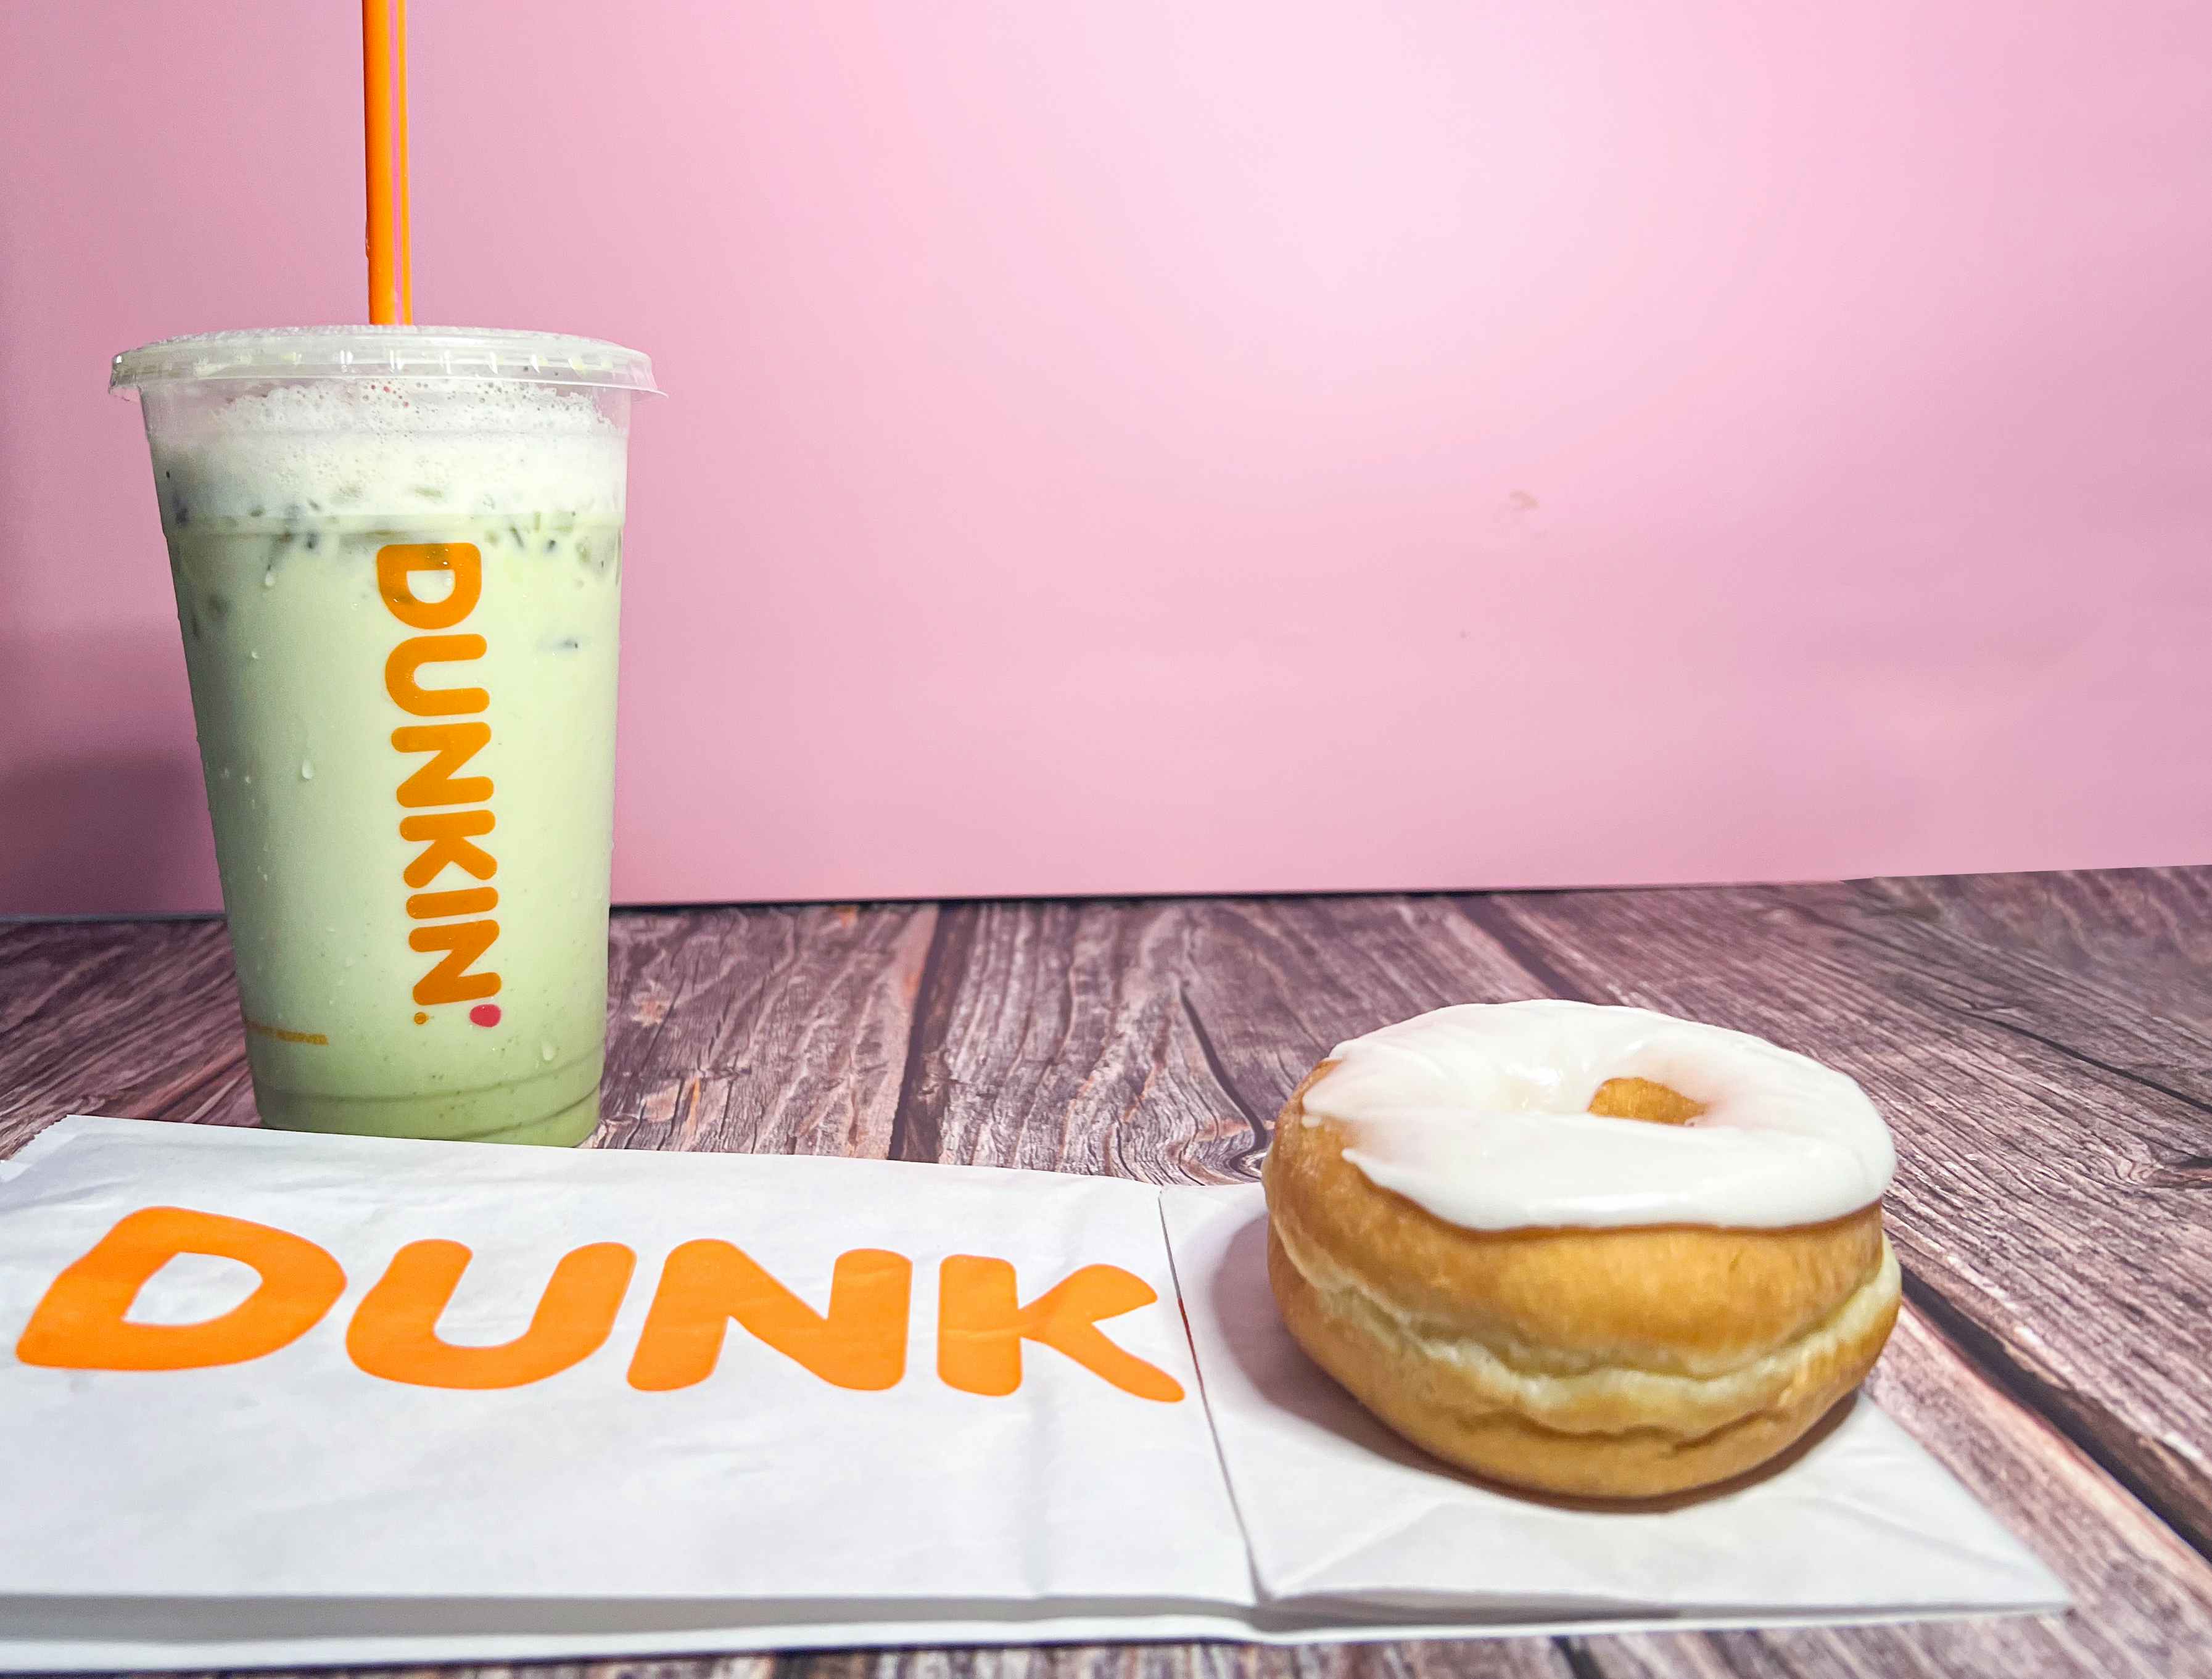 White glazed donut from dunkin donuts along with a green matcha drink against a pink background